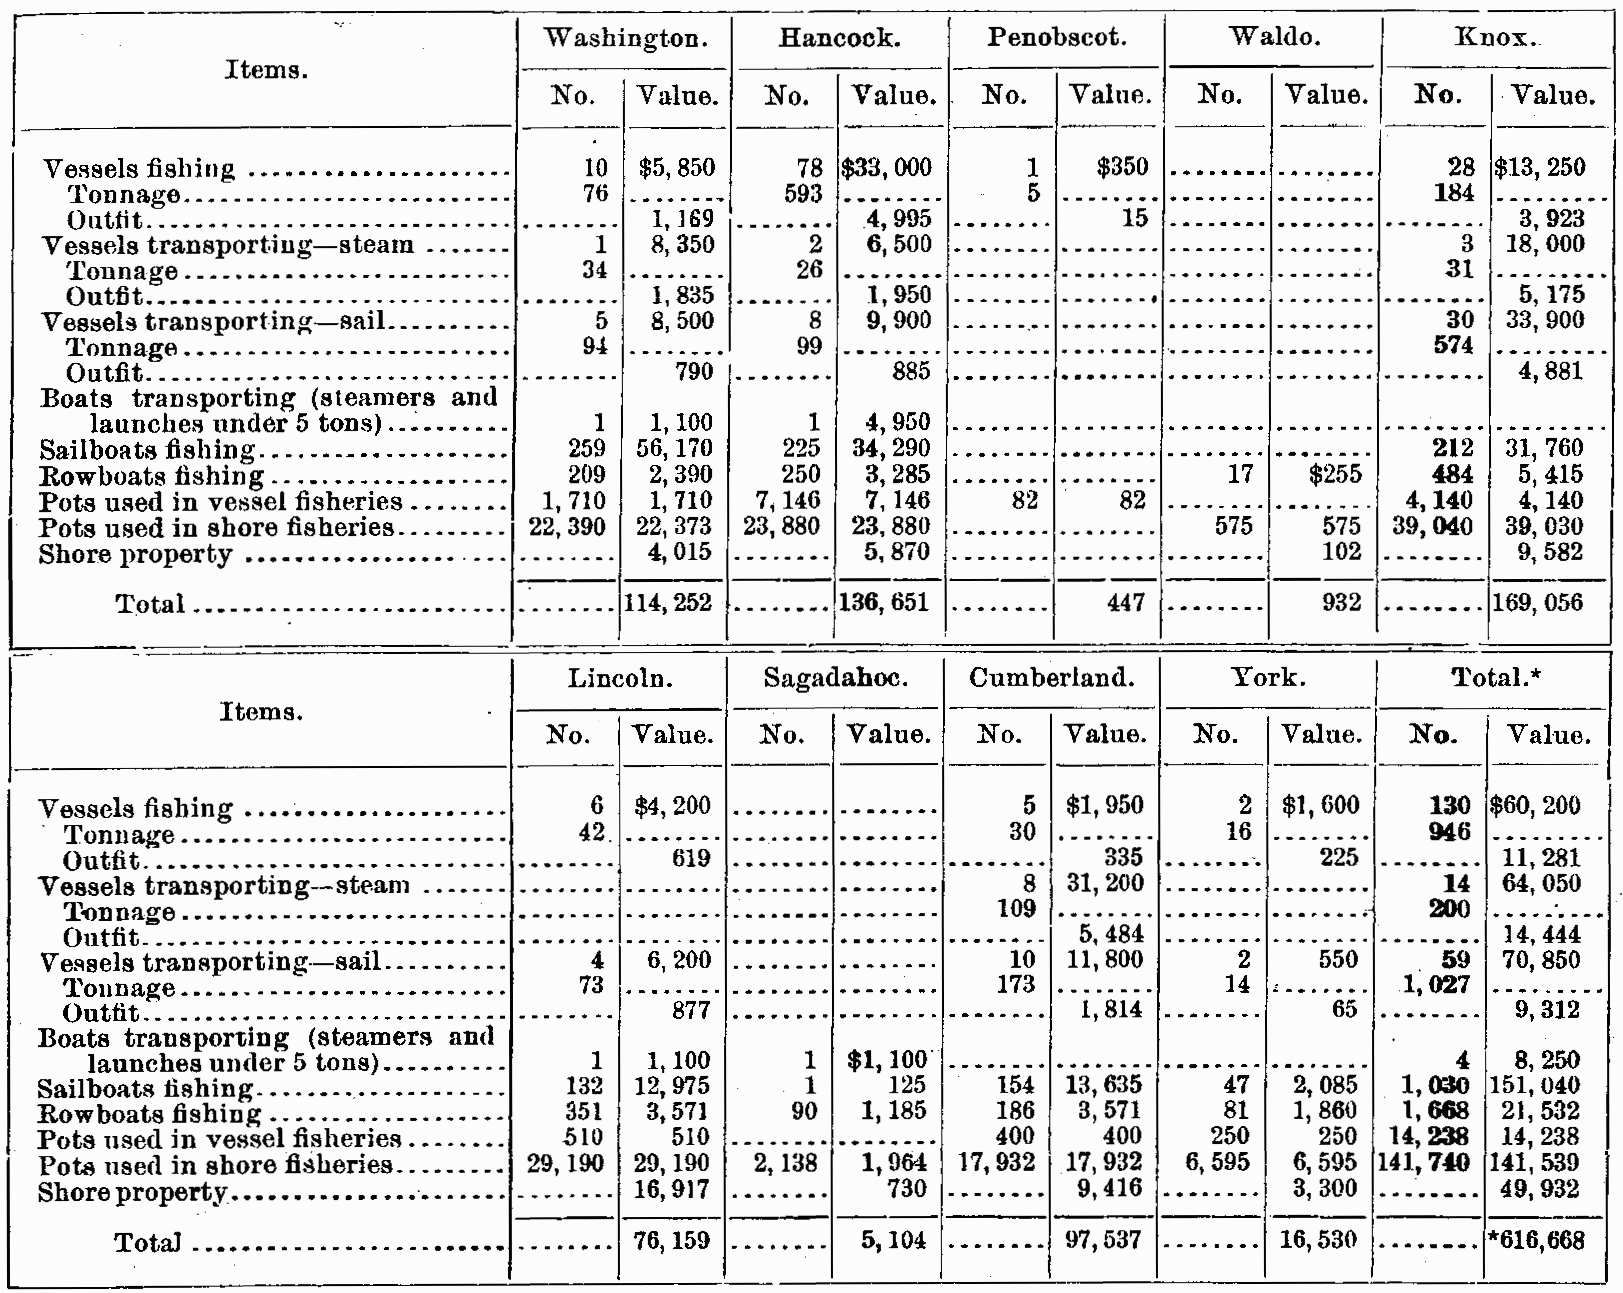 Table of employment in the lobster industry in 1898